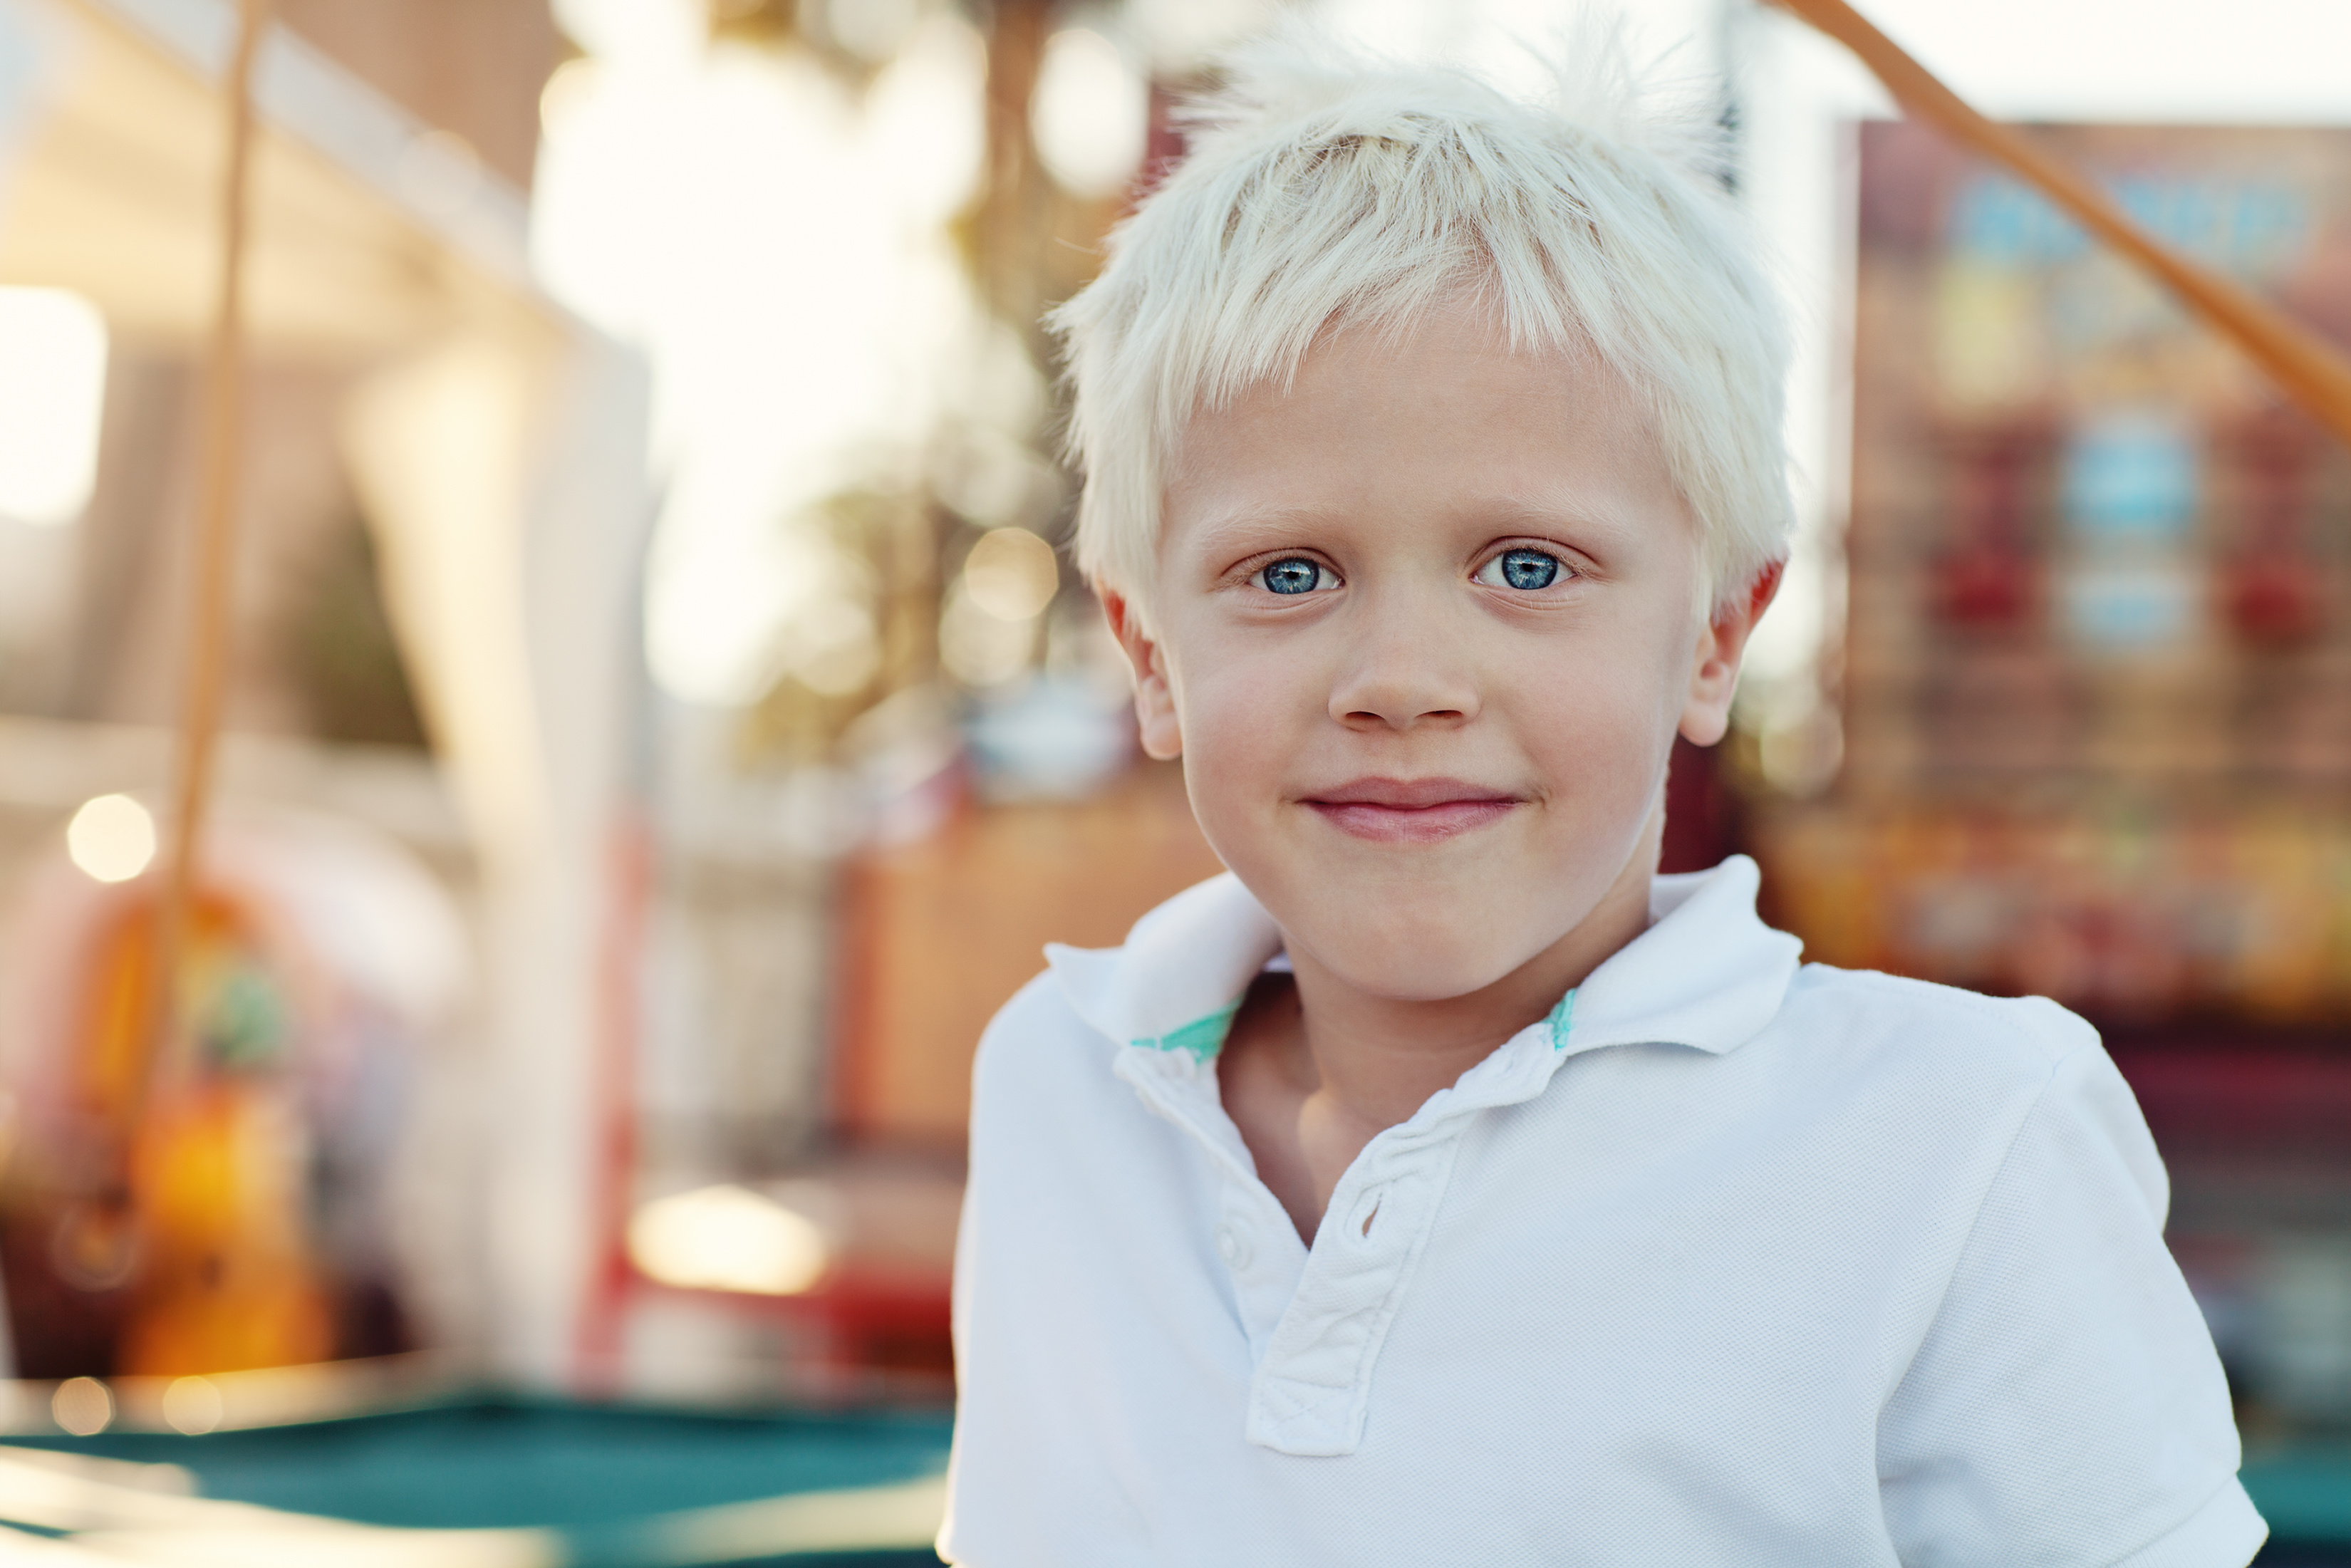 6. "Blonde Hair for Boys: Inspiration and Ideas for a New Look" - wide 6